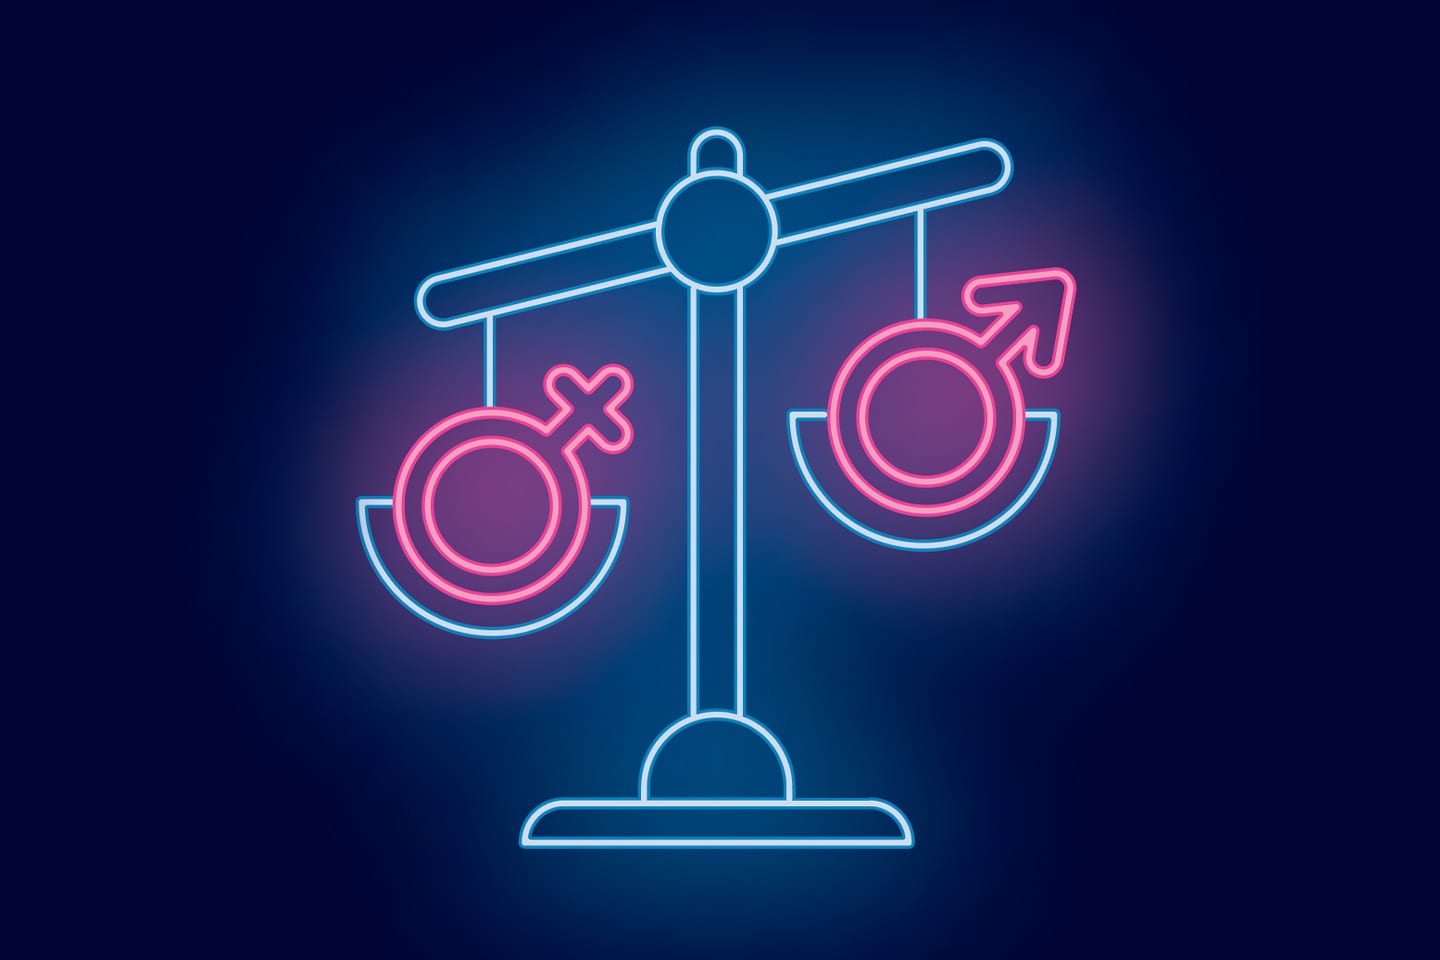 neon illustration of a scale holding gender signs